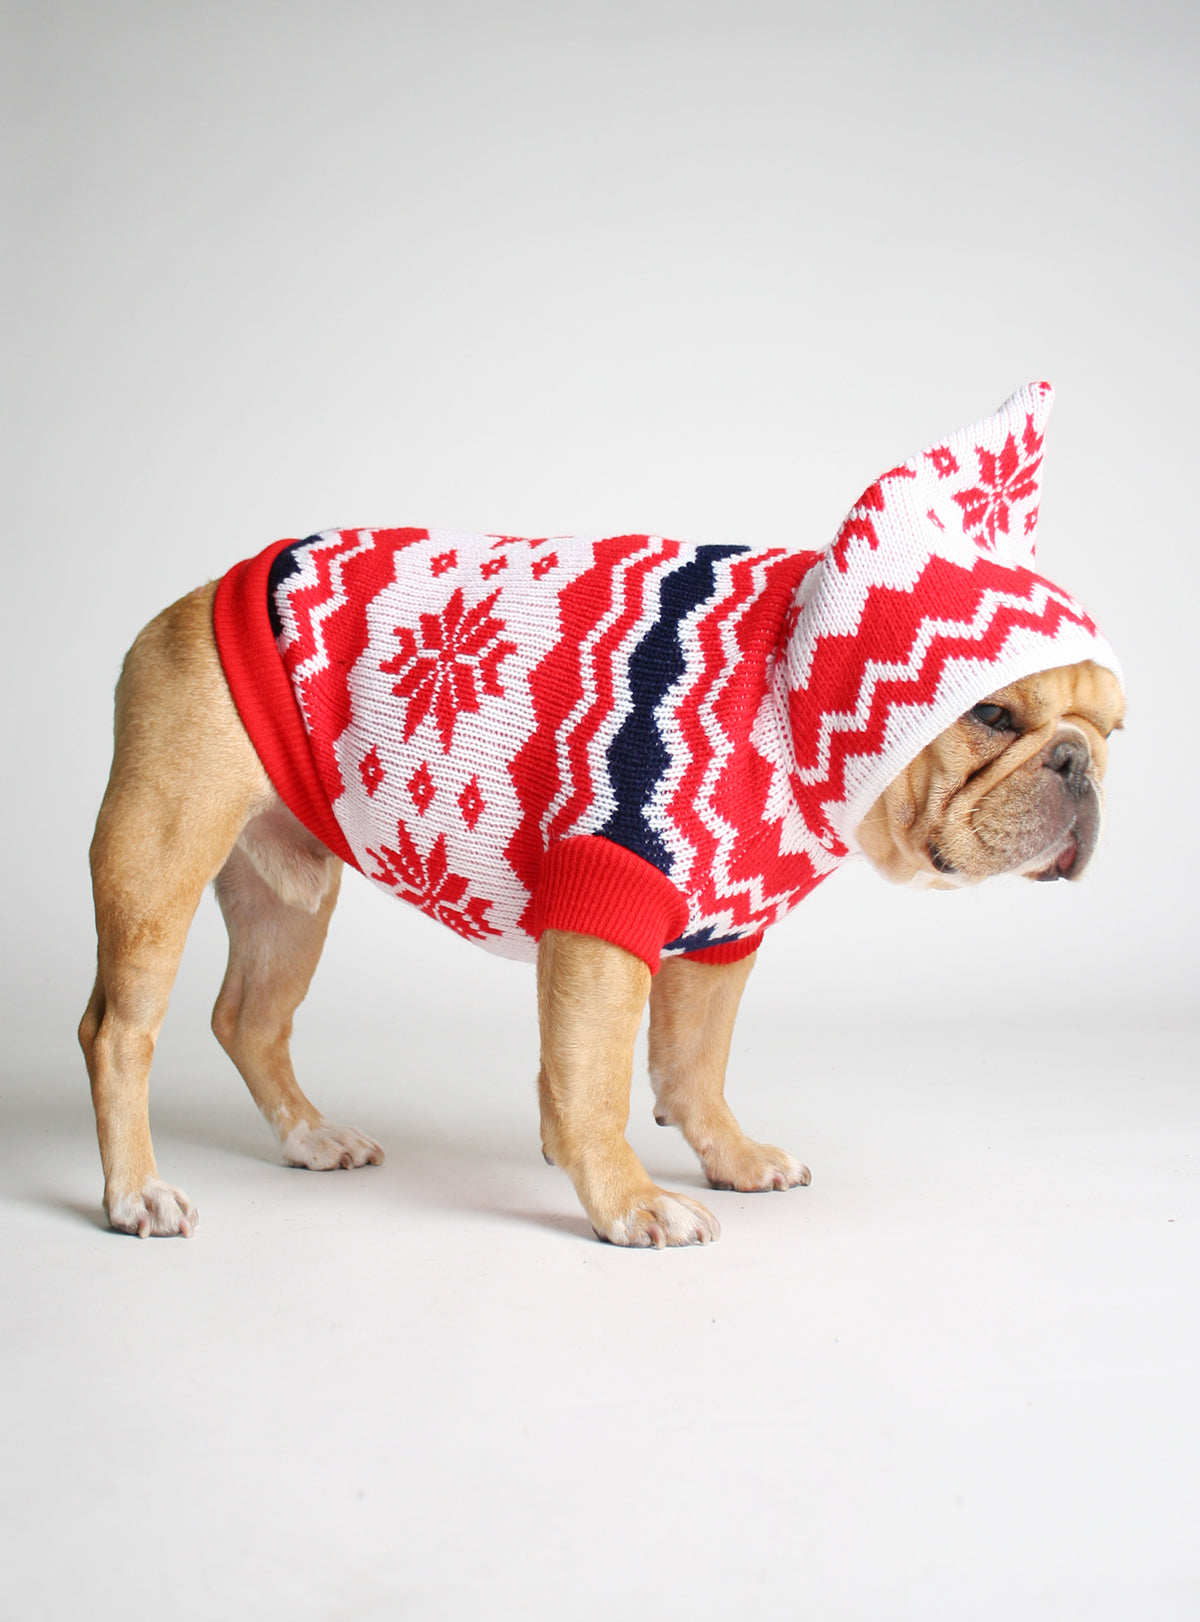 The Frostbite Dog Sweater